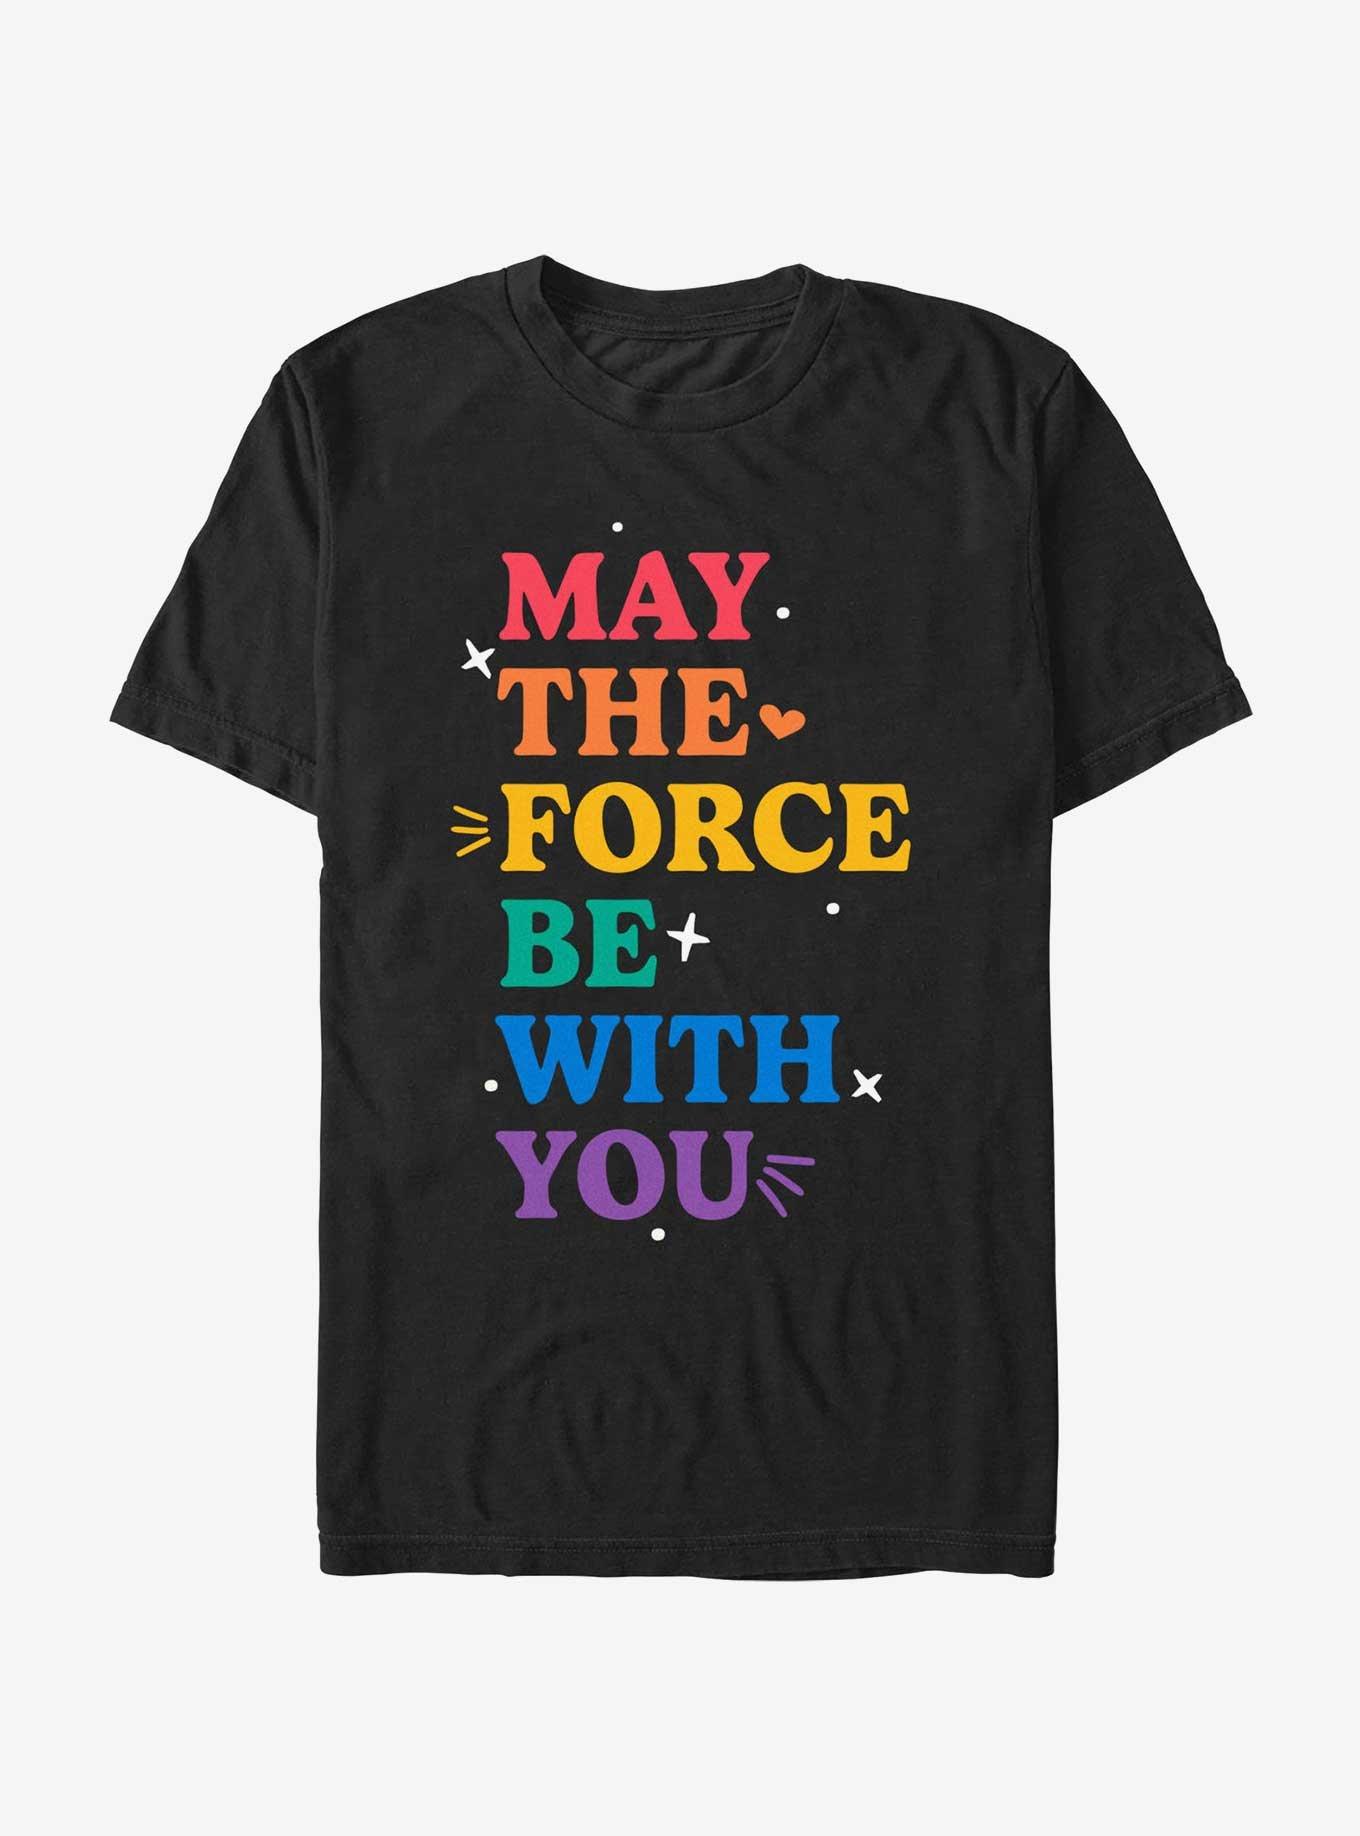 Star Wars Force With You Multicolor Pride T-Shirt, BLACK, hi-res